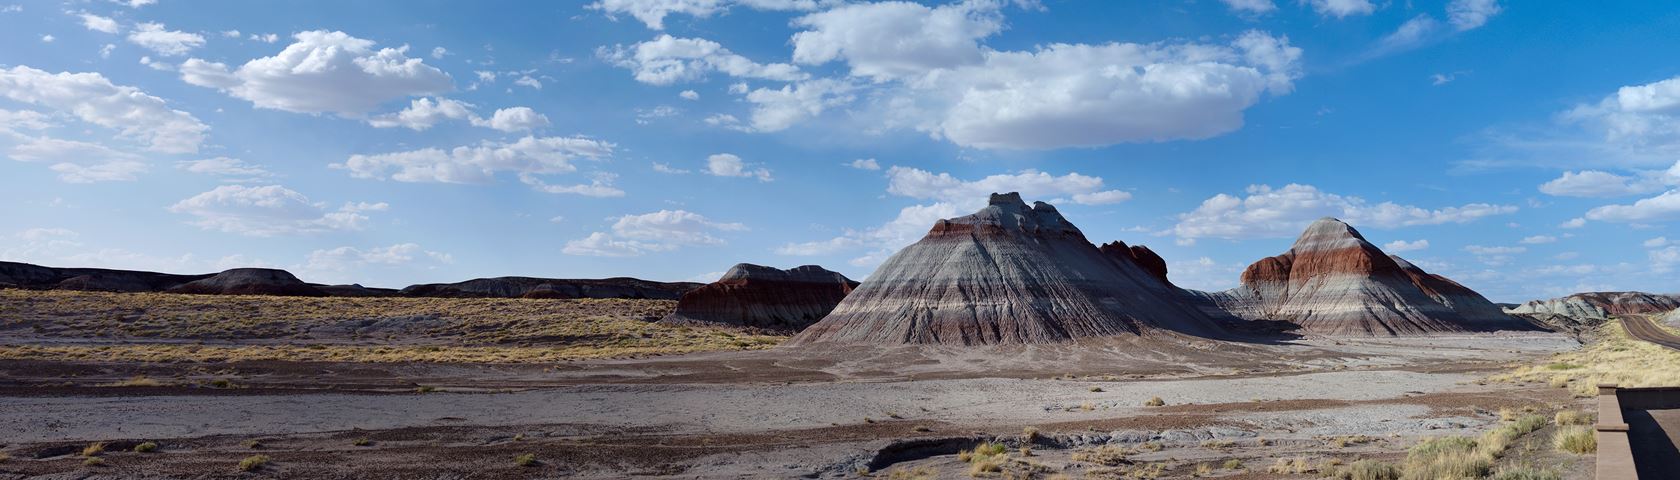 Petrified Forest State Park